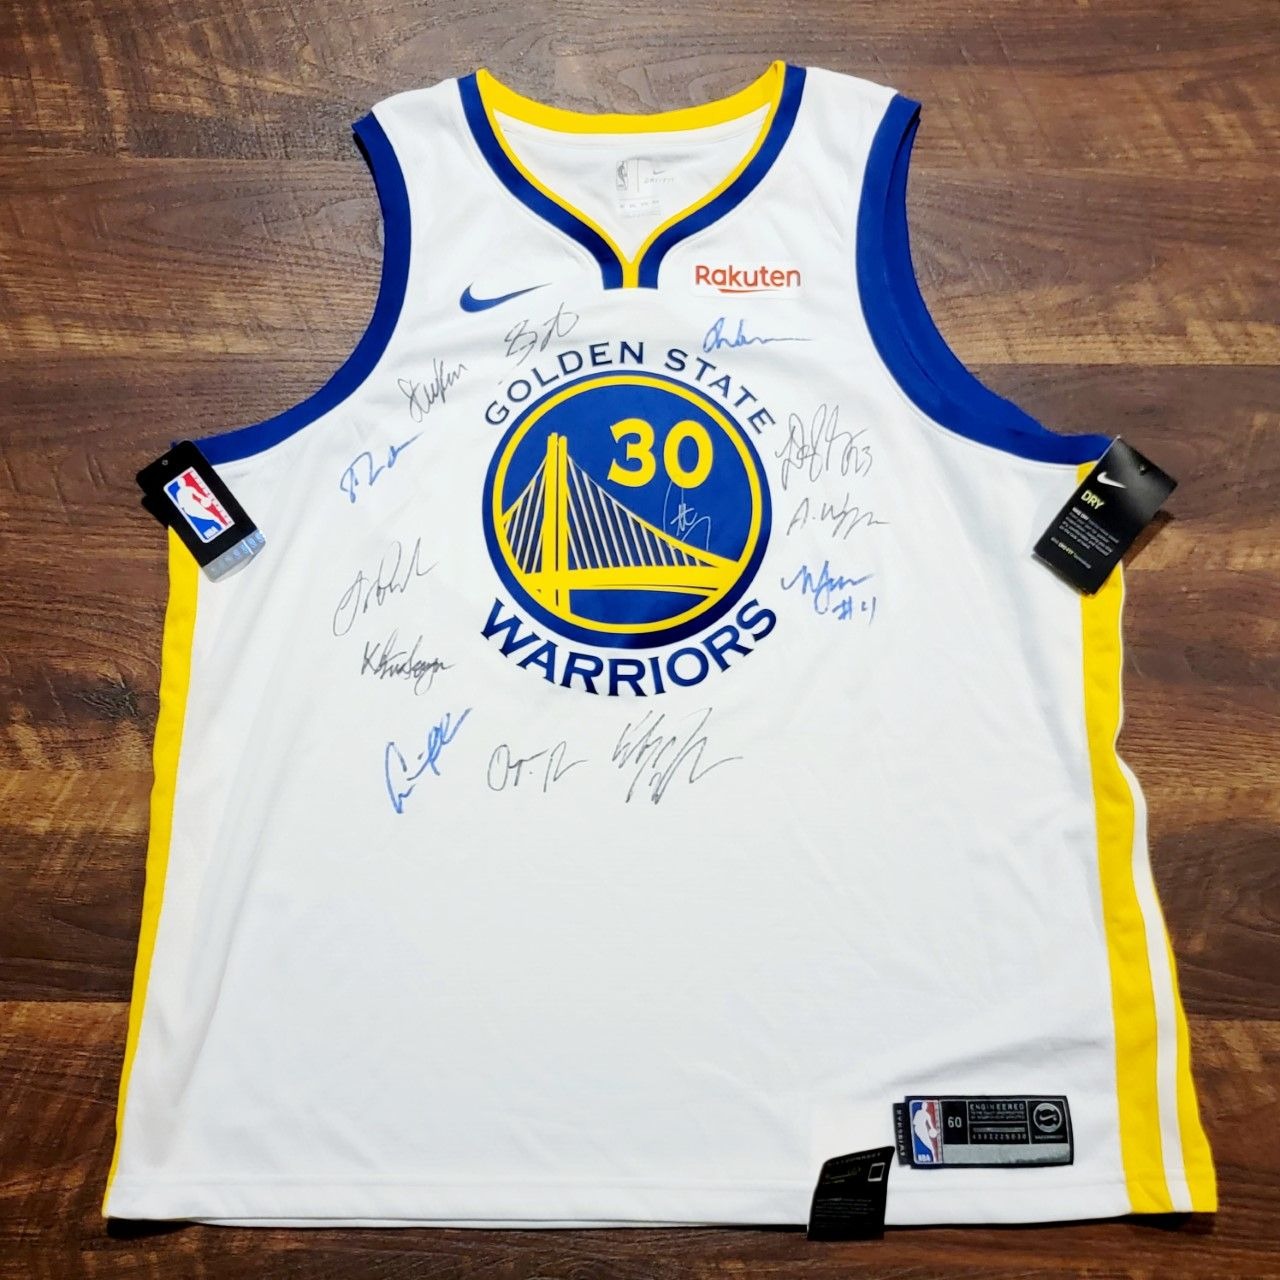 Other, Klay Thompson Signed Jersey